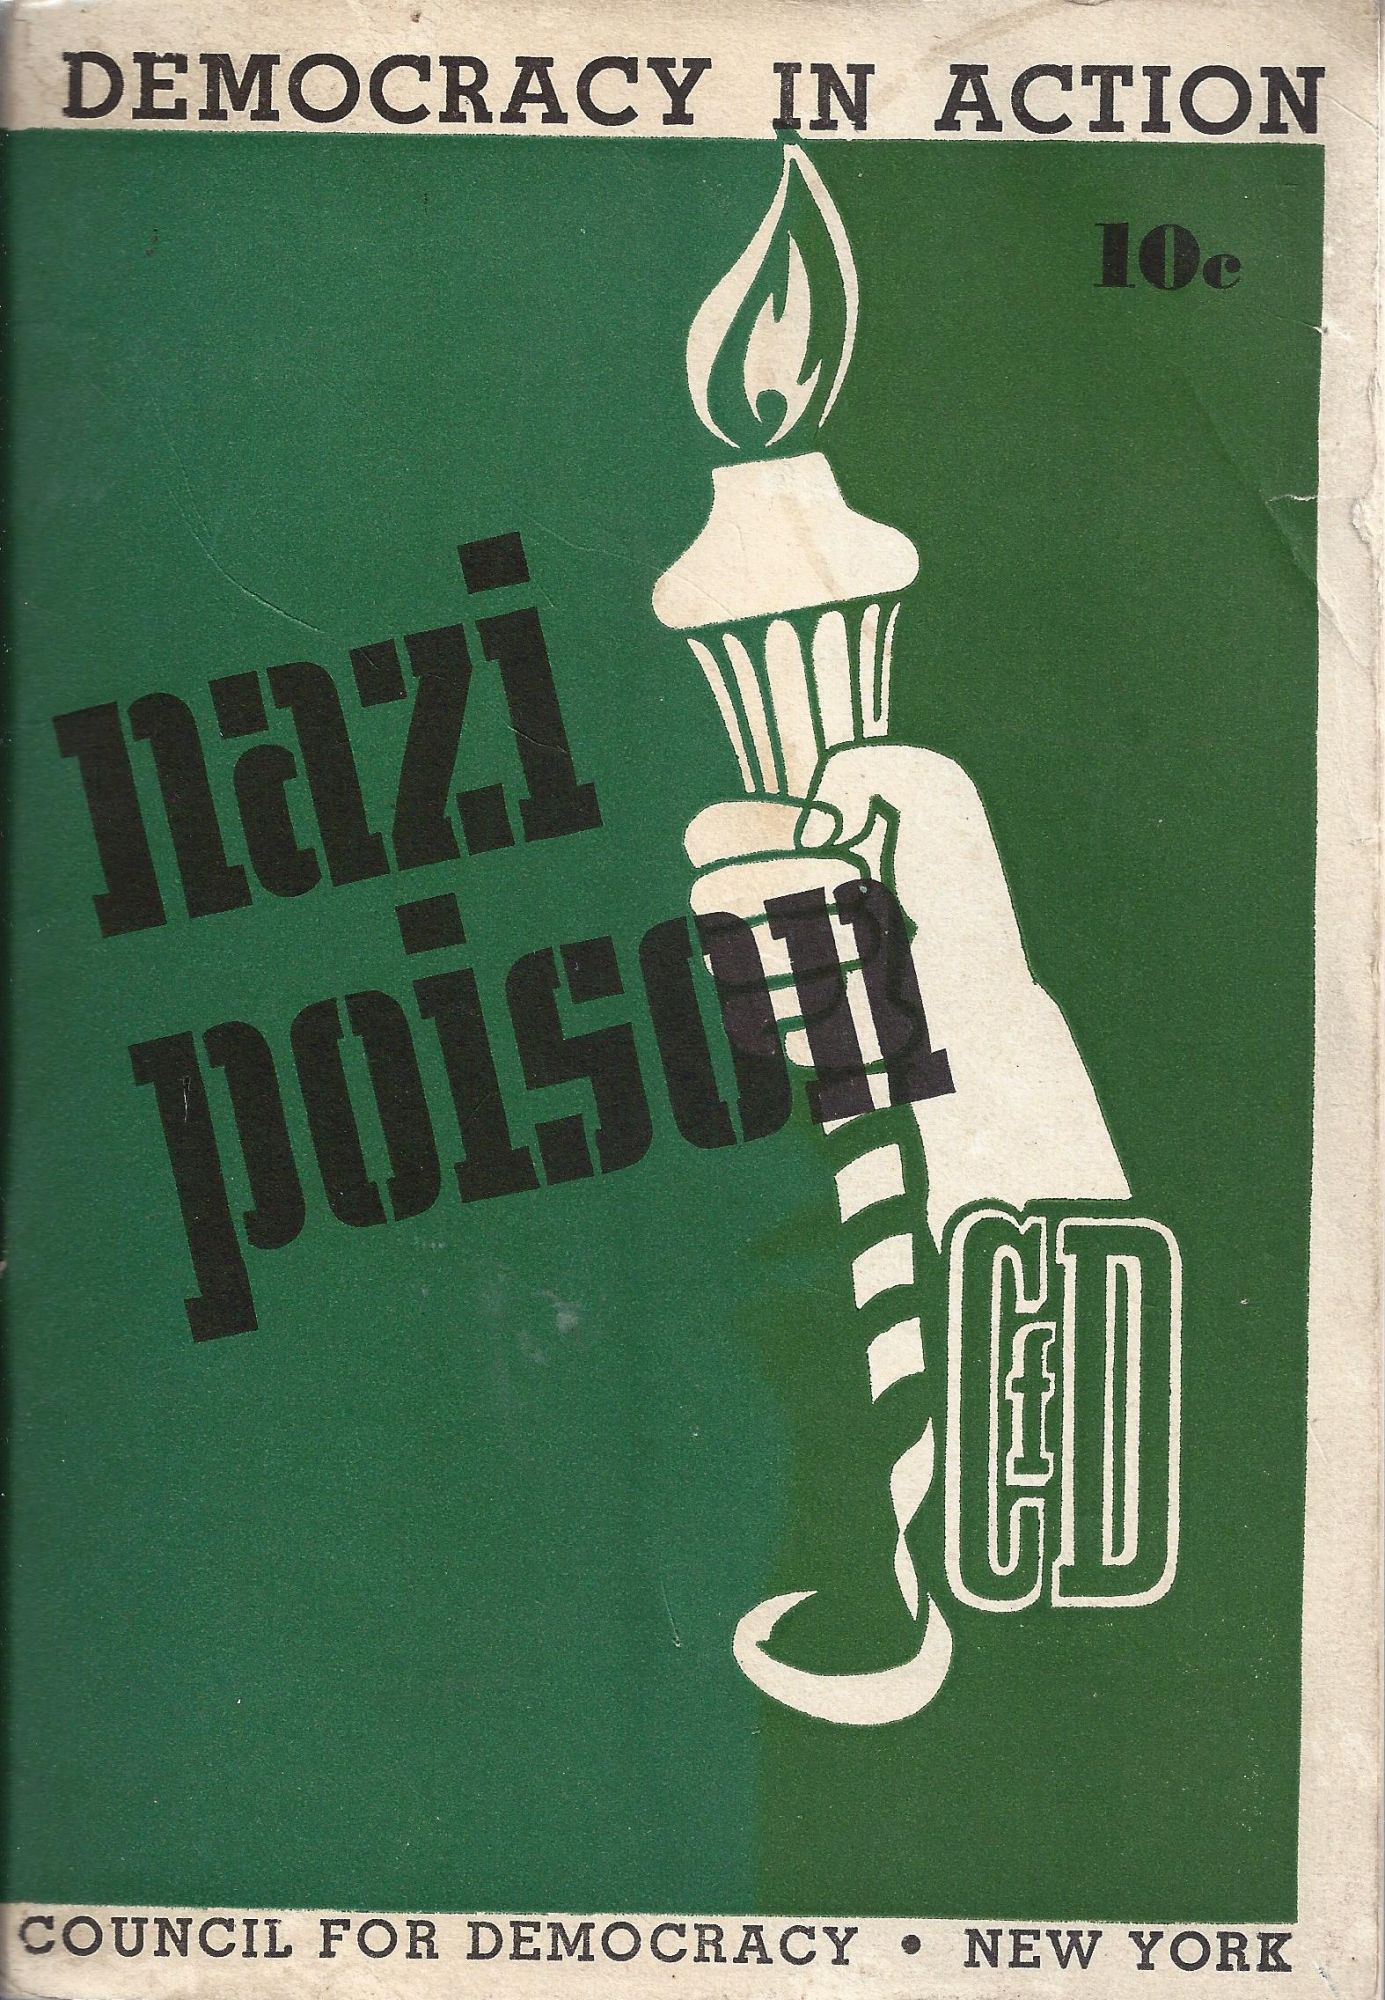 NAZI POISON; HOW WE CAN DESTROY HITLER'S PROPAGANDA AGAINST THE JEWS - Council For Democracy.